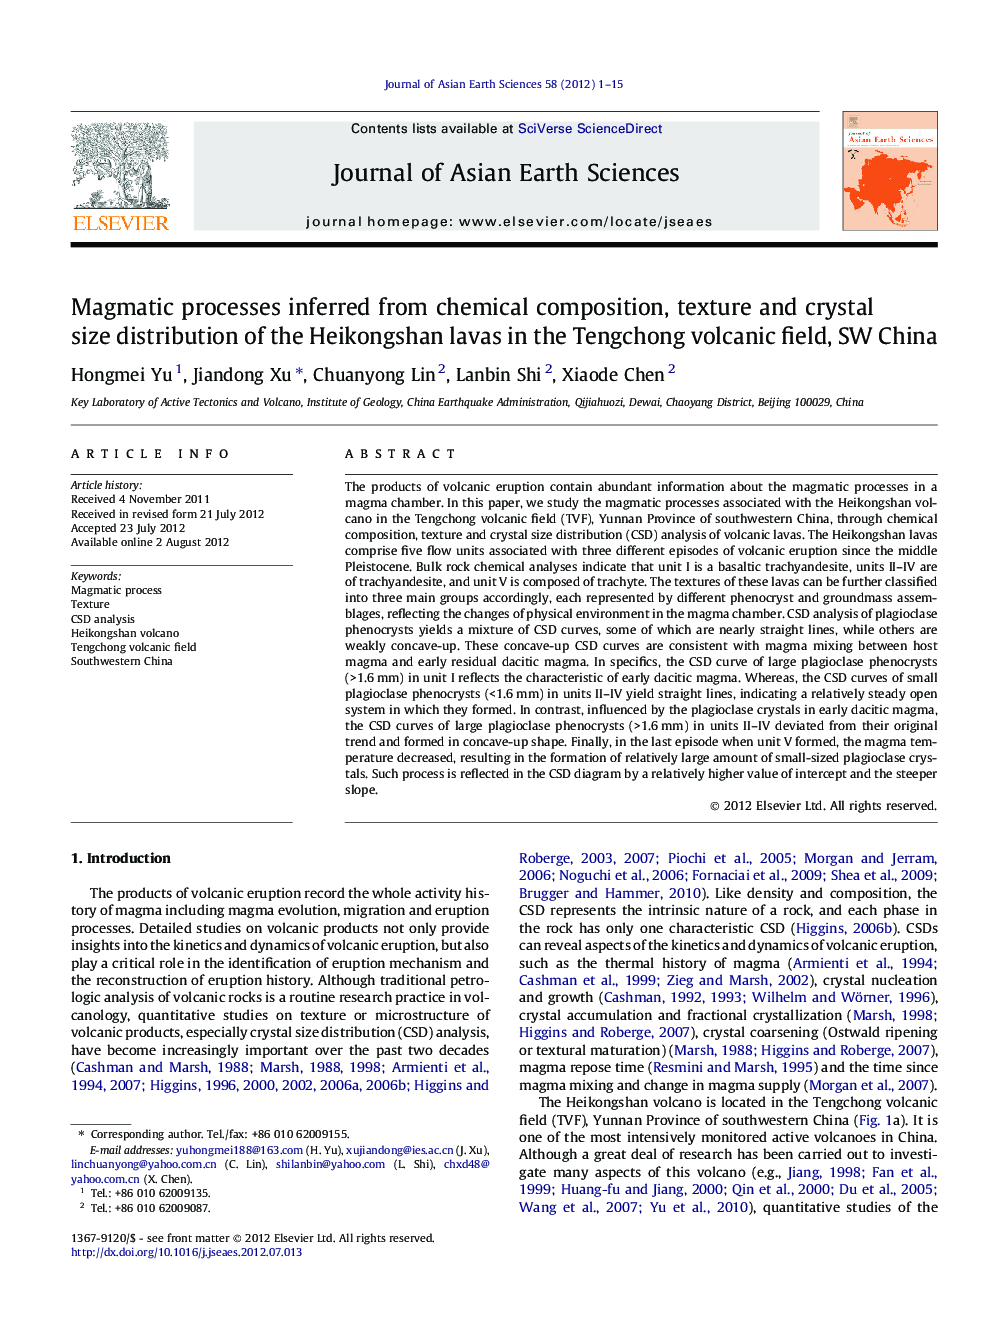 Magmatic processes inferred from chemical composition, texture and crystal size distribution of the Heikongshan lavas in the Tengchong volcanic field, SW China